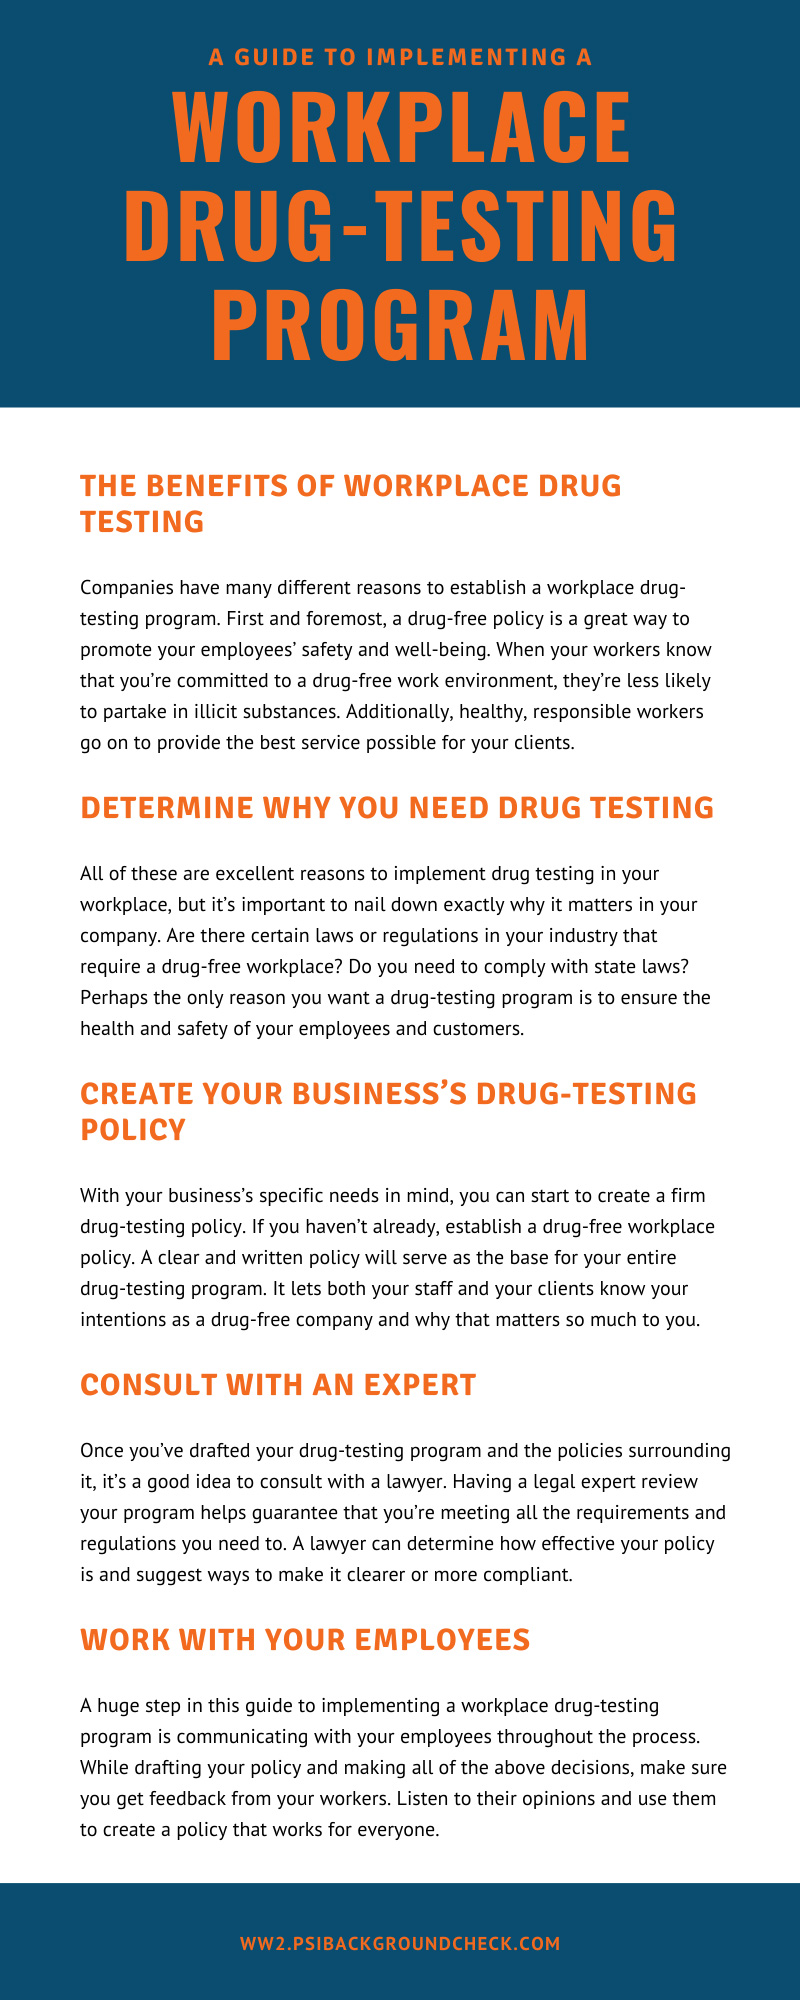 A Guide to Implementing a Workplace Drug-Testing Program